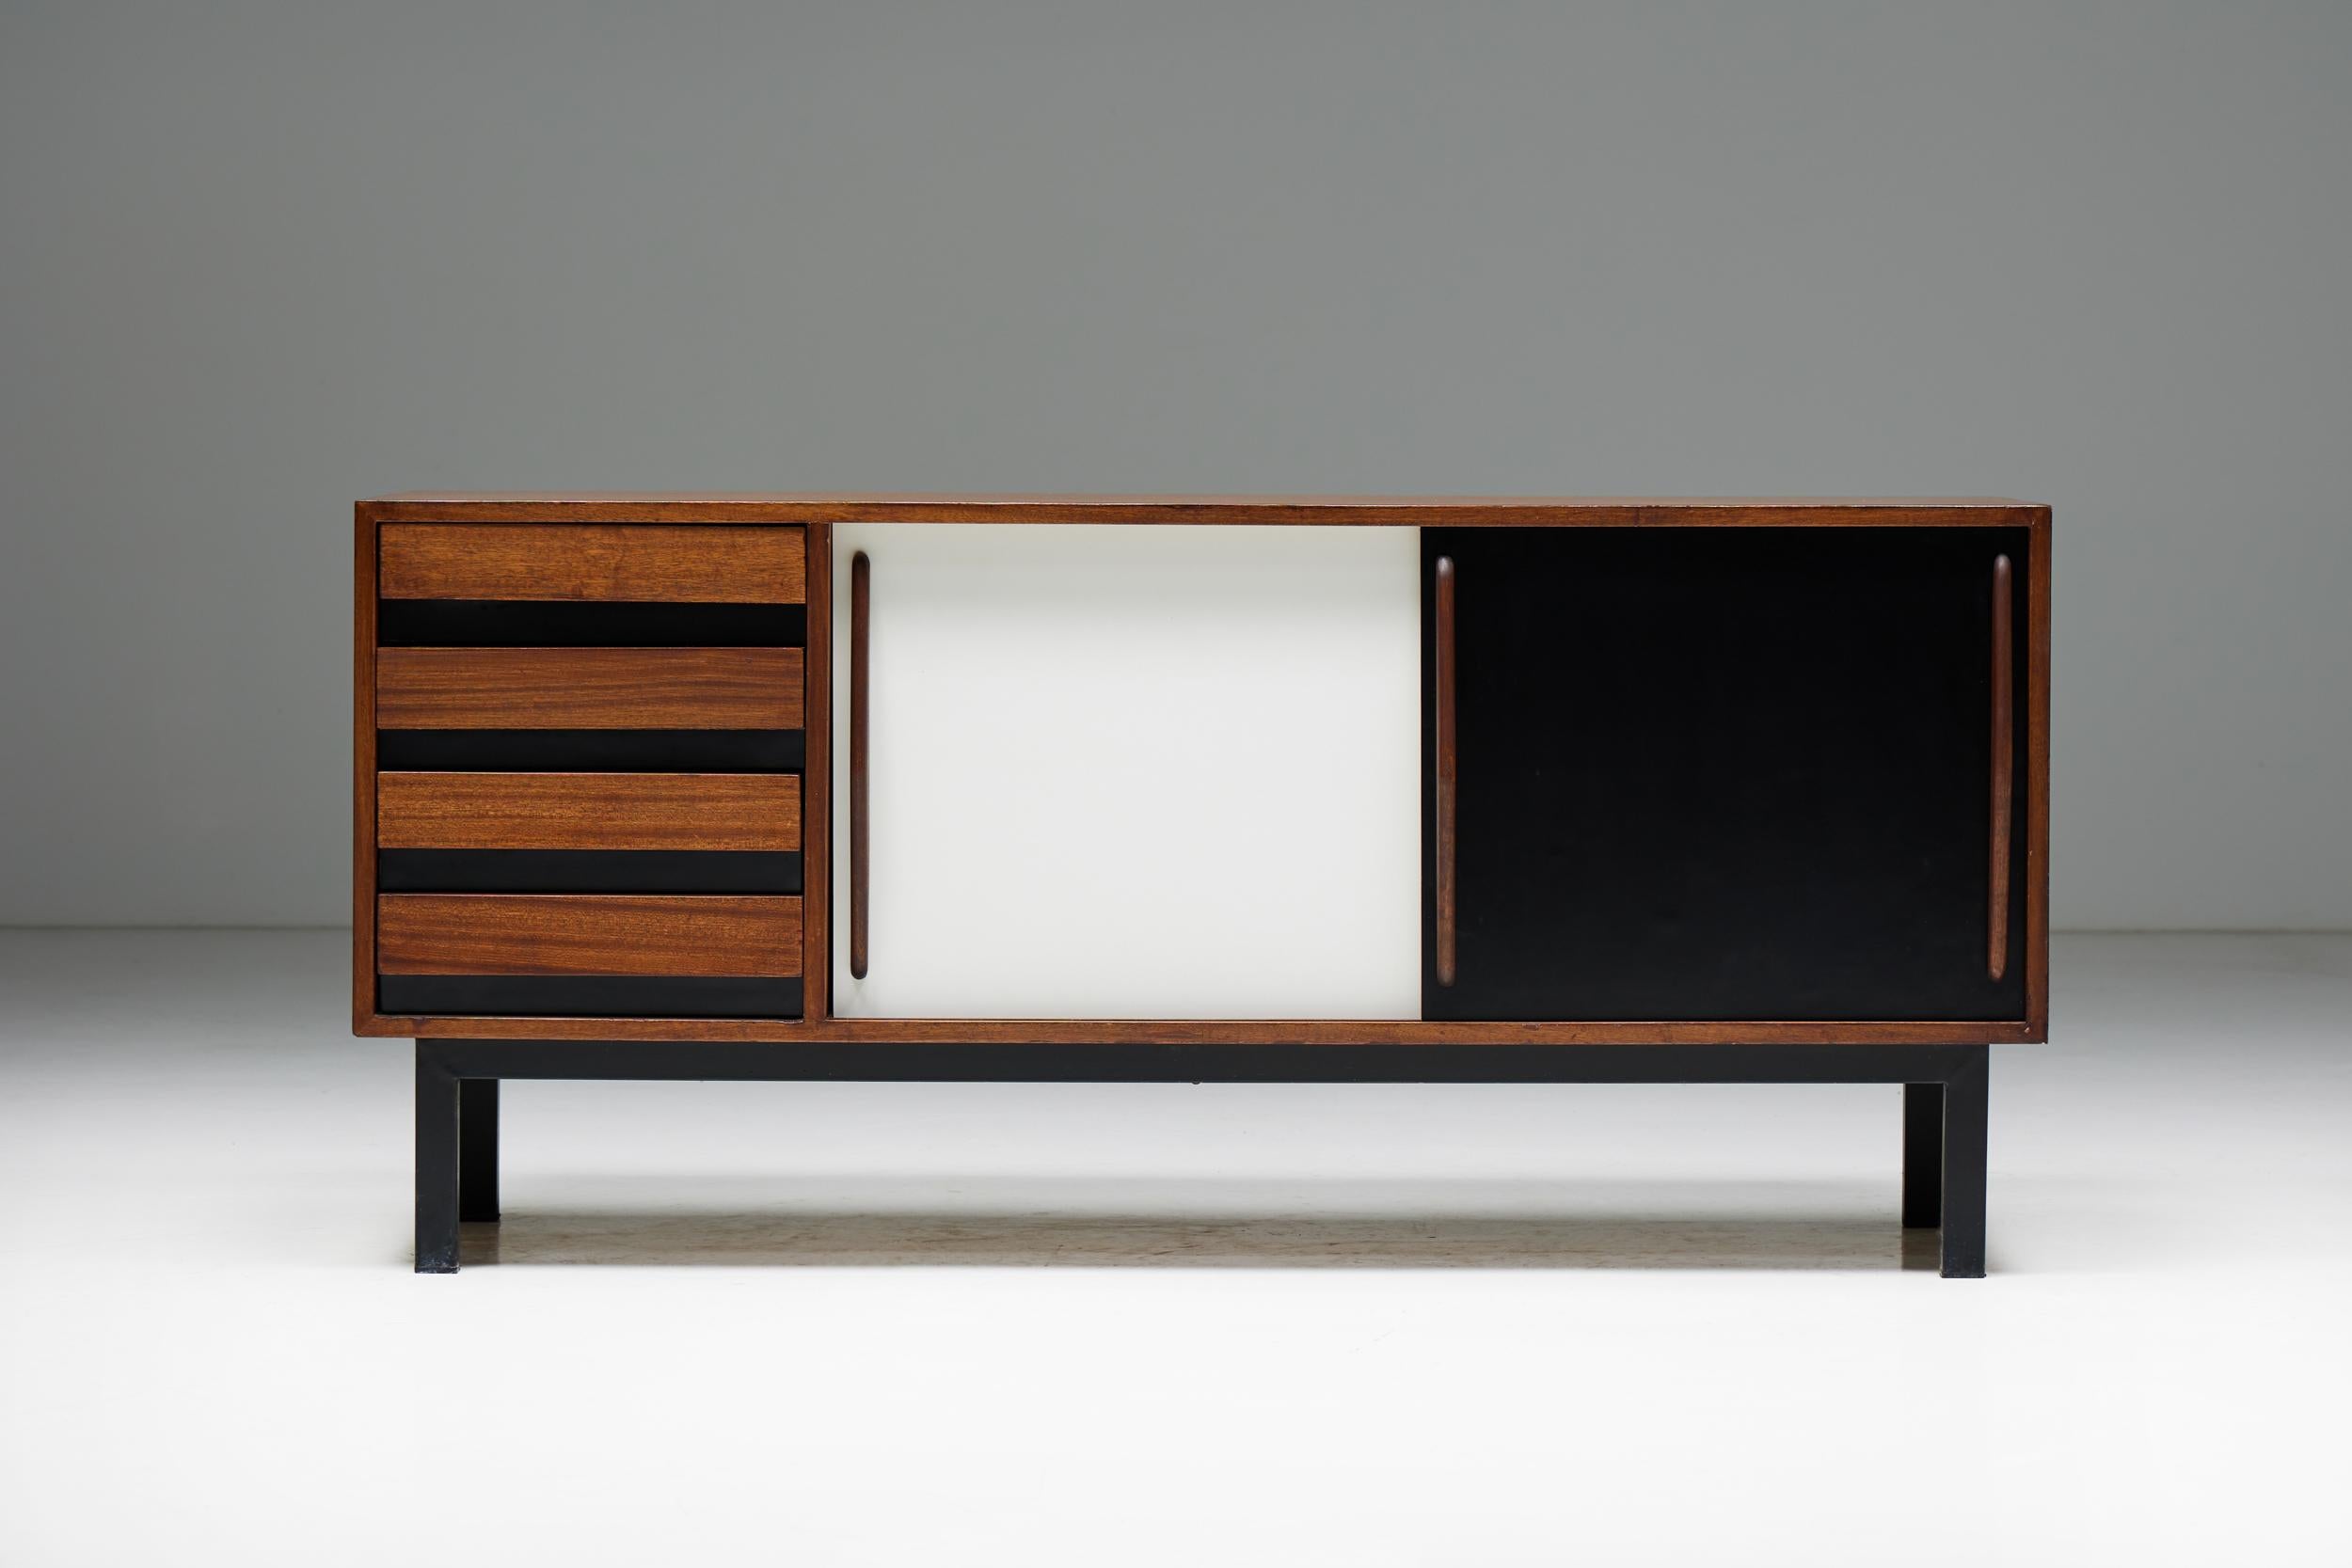 Charlotte Perriand; Cansado; Steph Simon; Mid-Century Modern; Modernist Design; 1950s; 1960s; 1958; Mauritania; France;

'Cansado' sideboard by Charlotte Perriand for Steph Simon in mahogany, a timeless piece designed for the mining town of Cansado